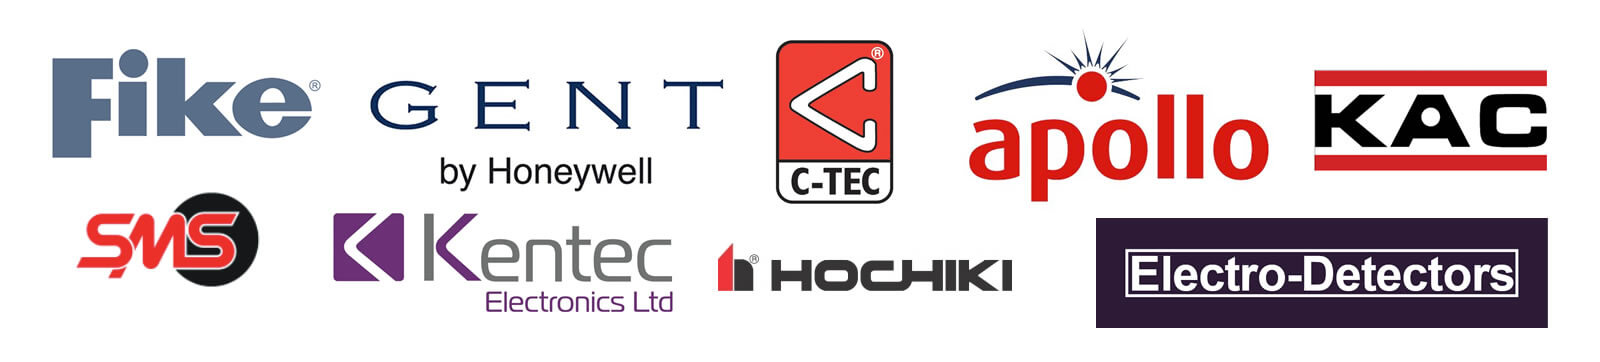 All of westcountry fire protection partners. including fike, gent, sms, kentec, c-tec, hochiki, apollo, kac and electro-detectors.